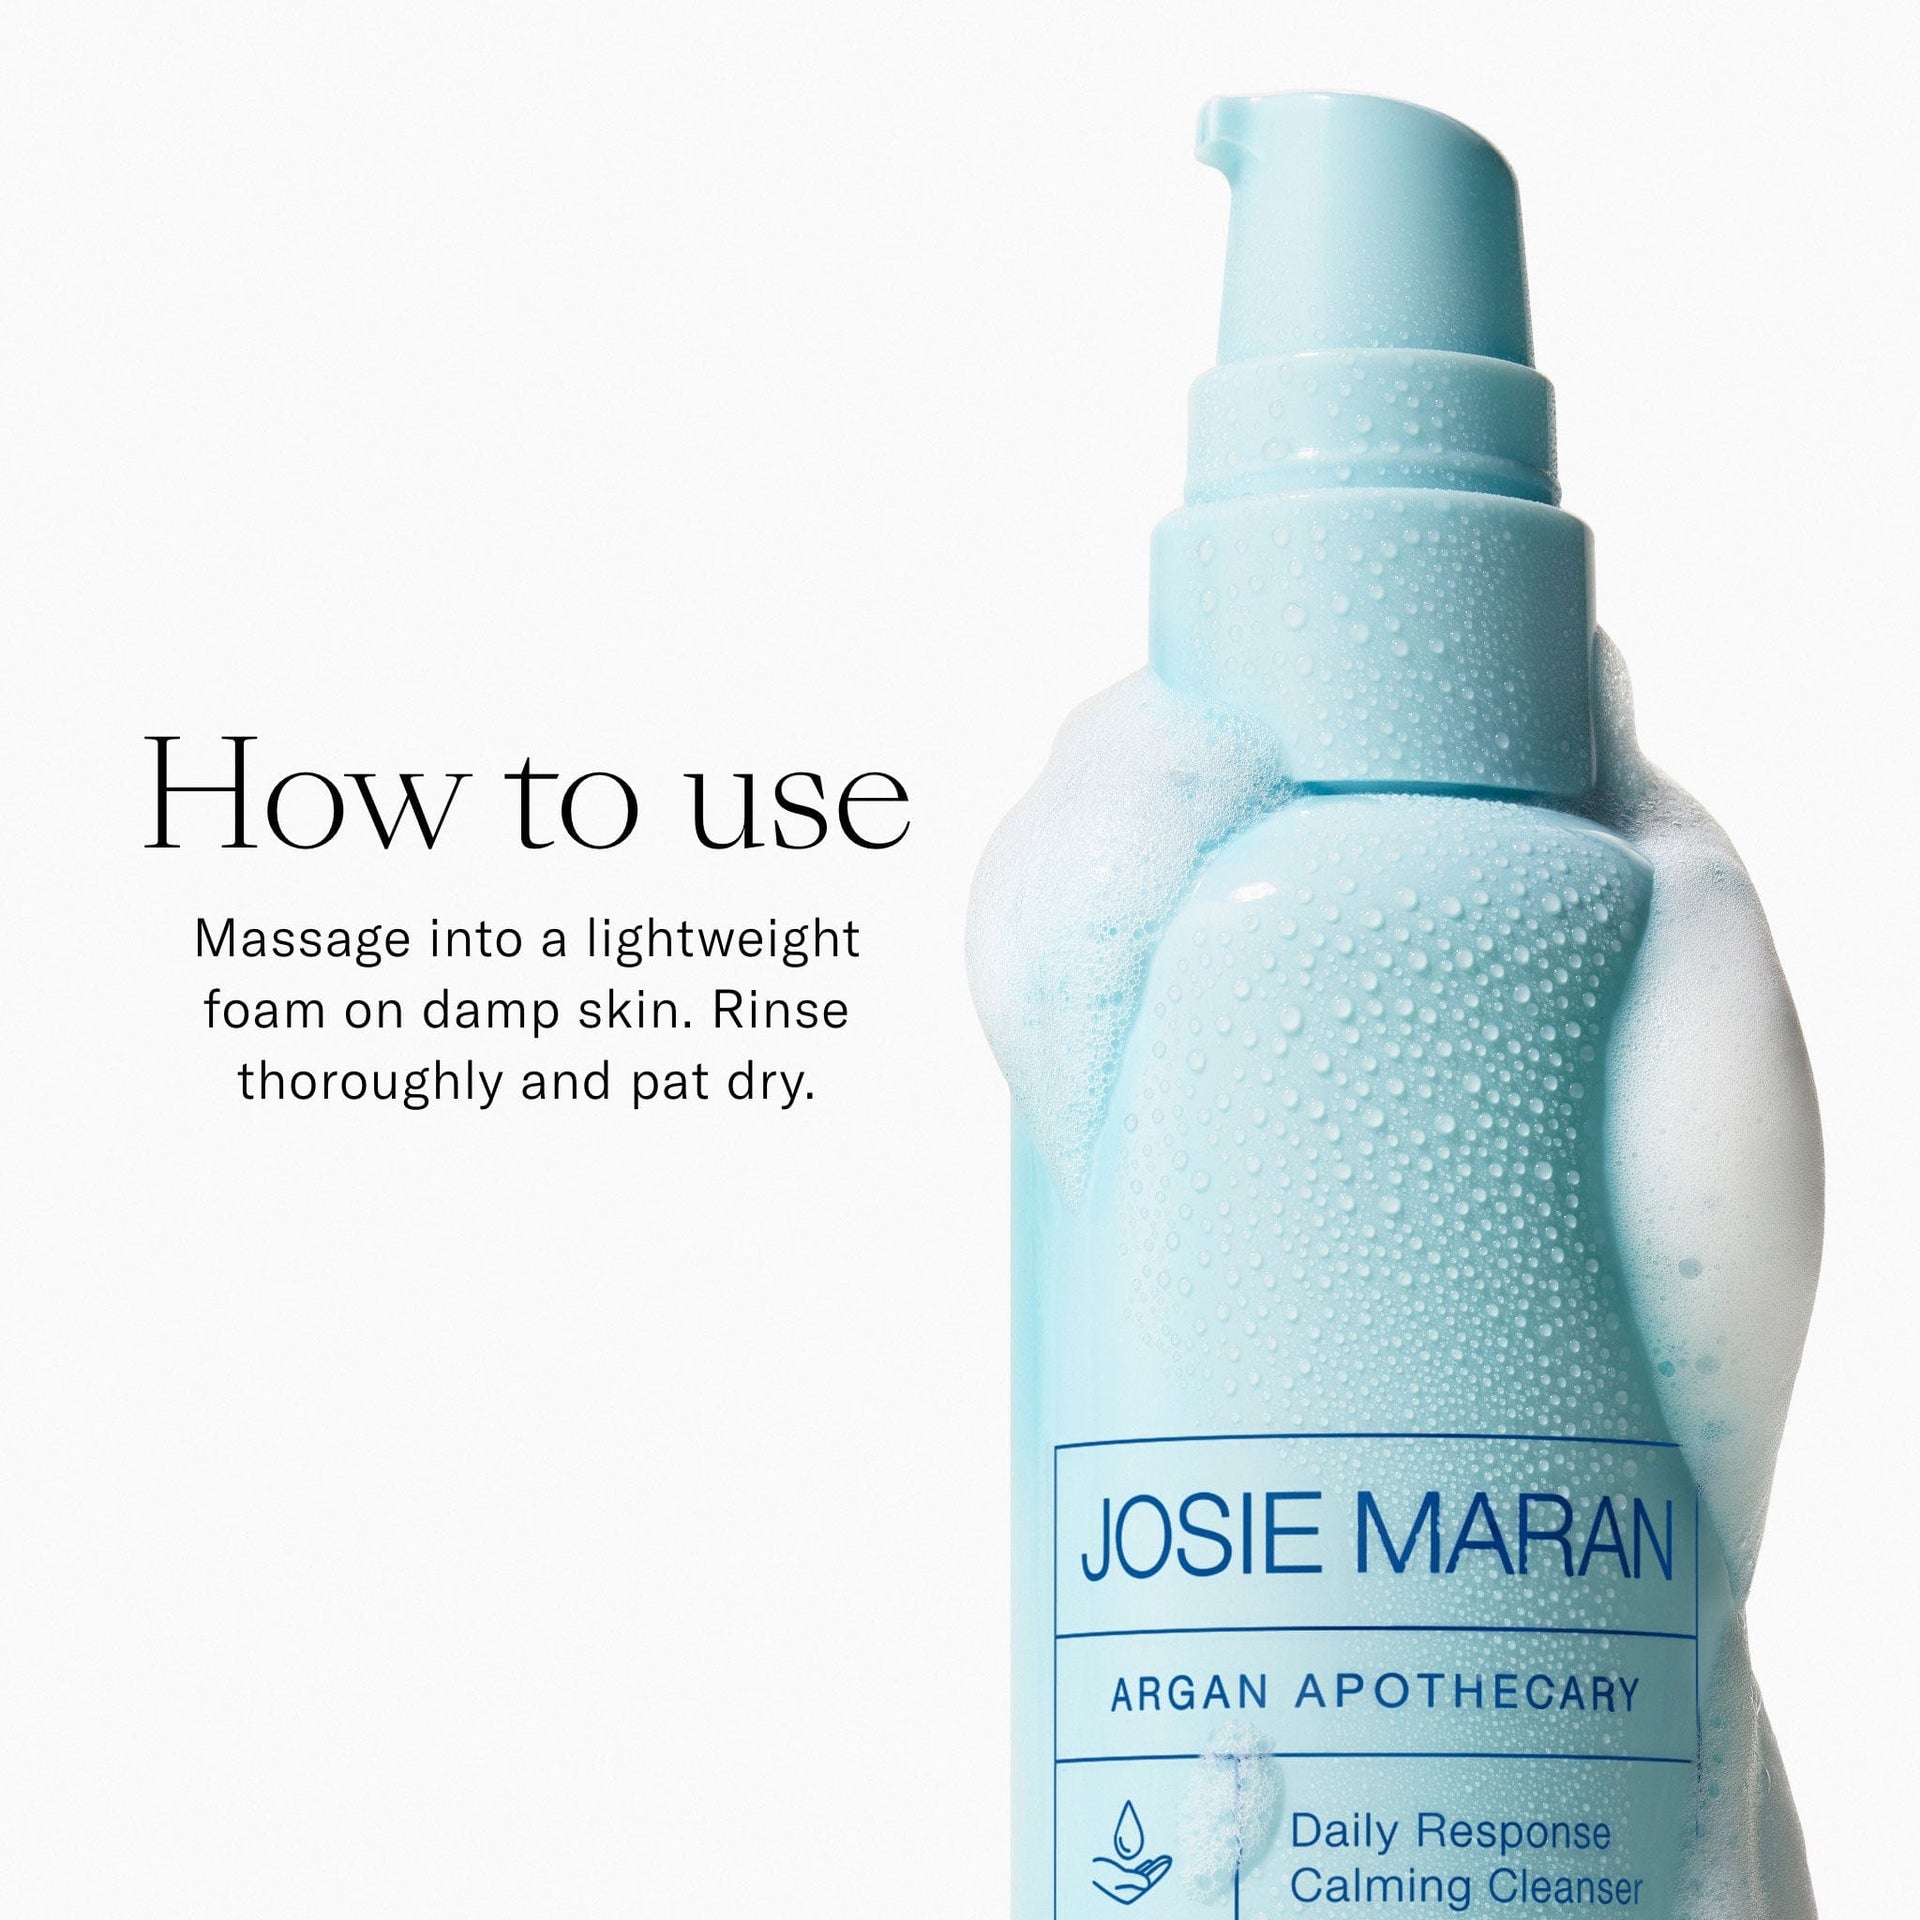 How to Use. Massage into a lightweight foam on damp skin. Rinse and pat dry.